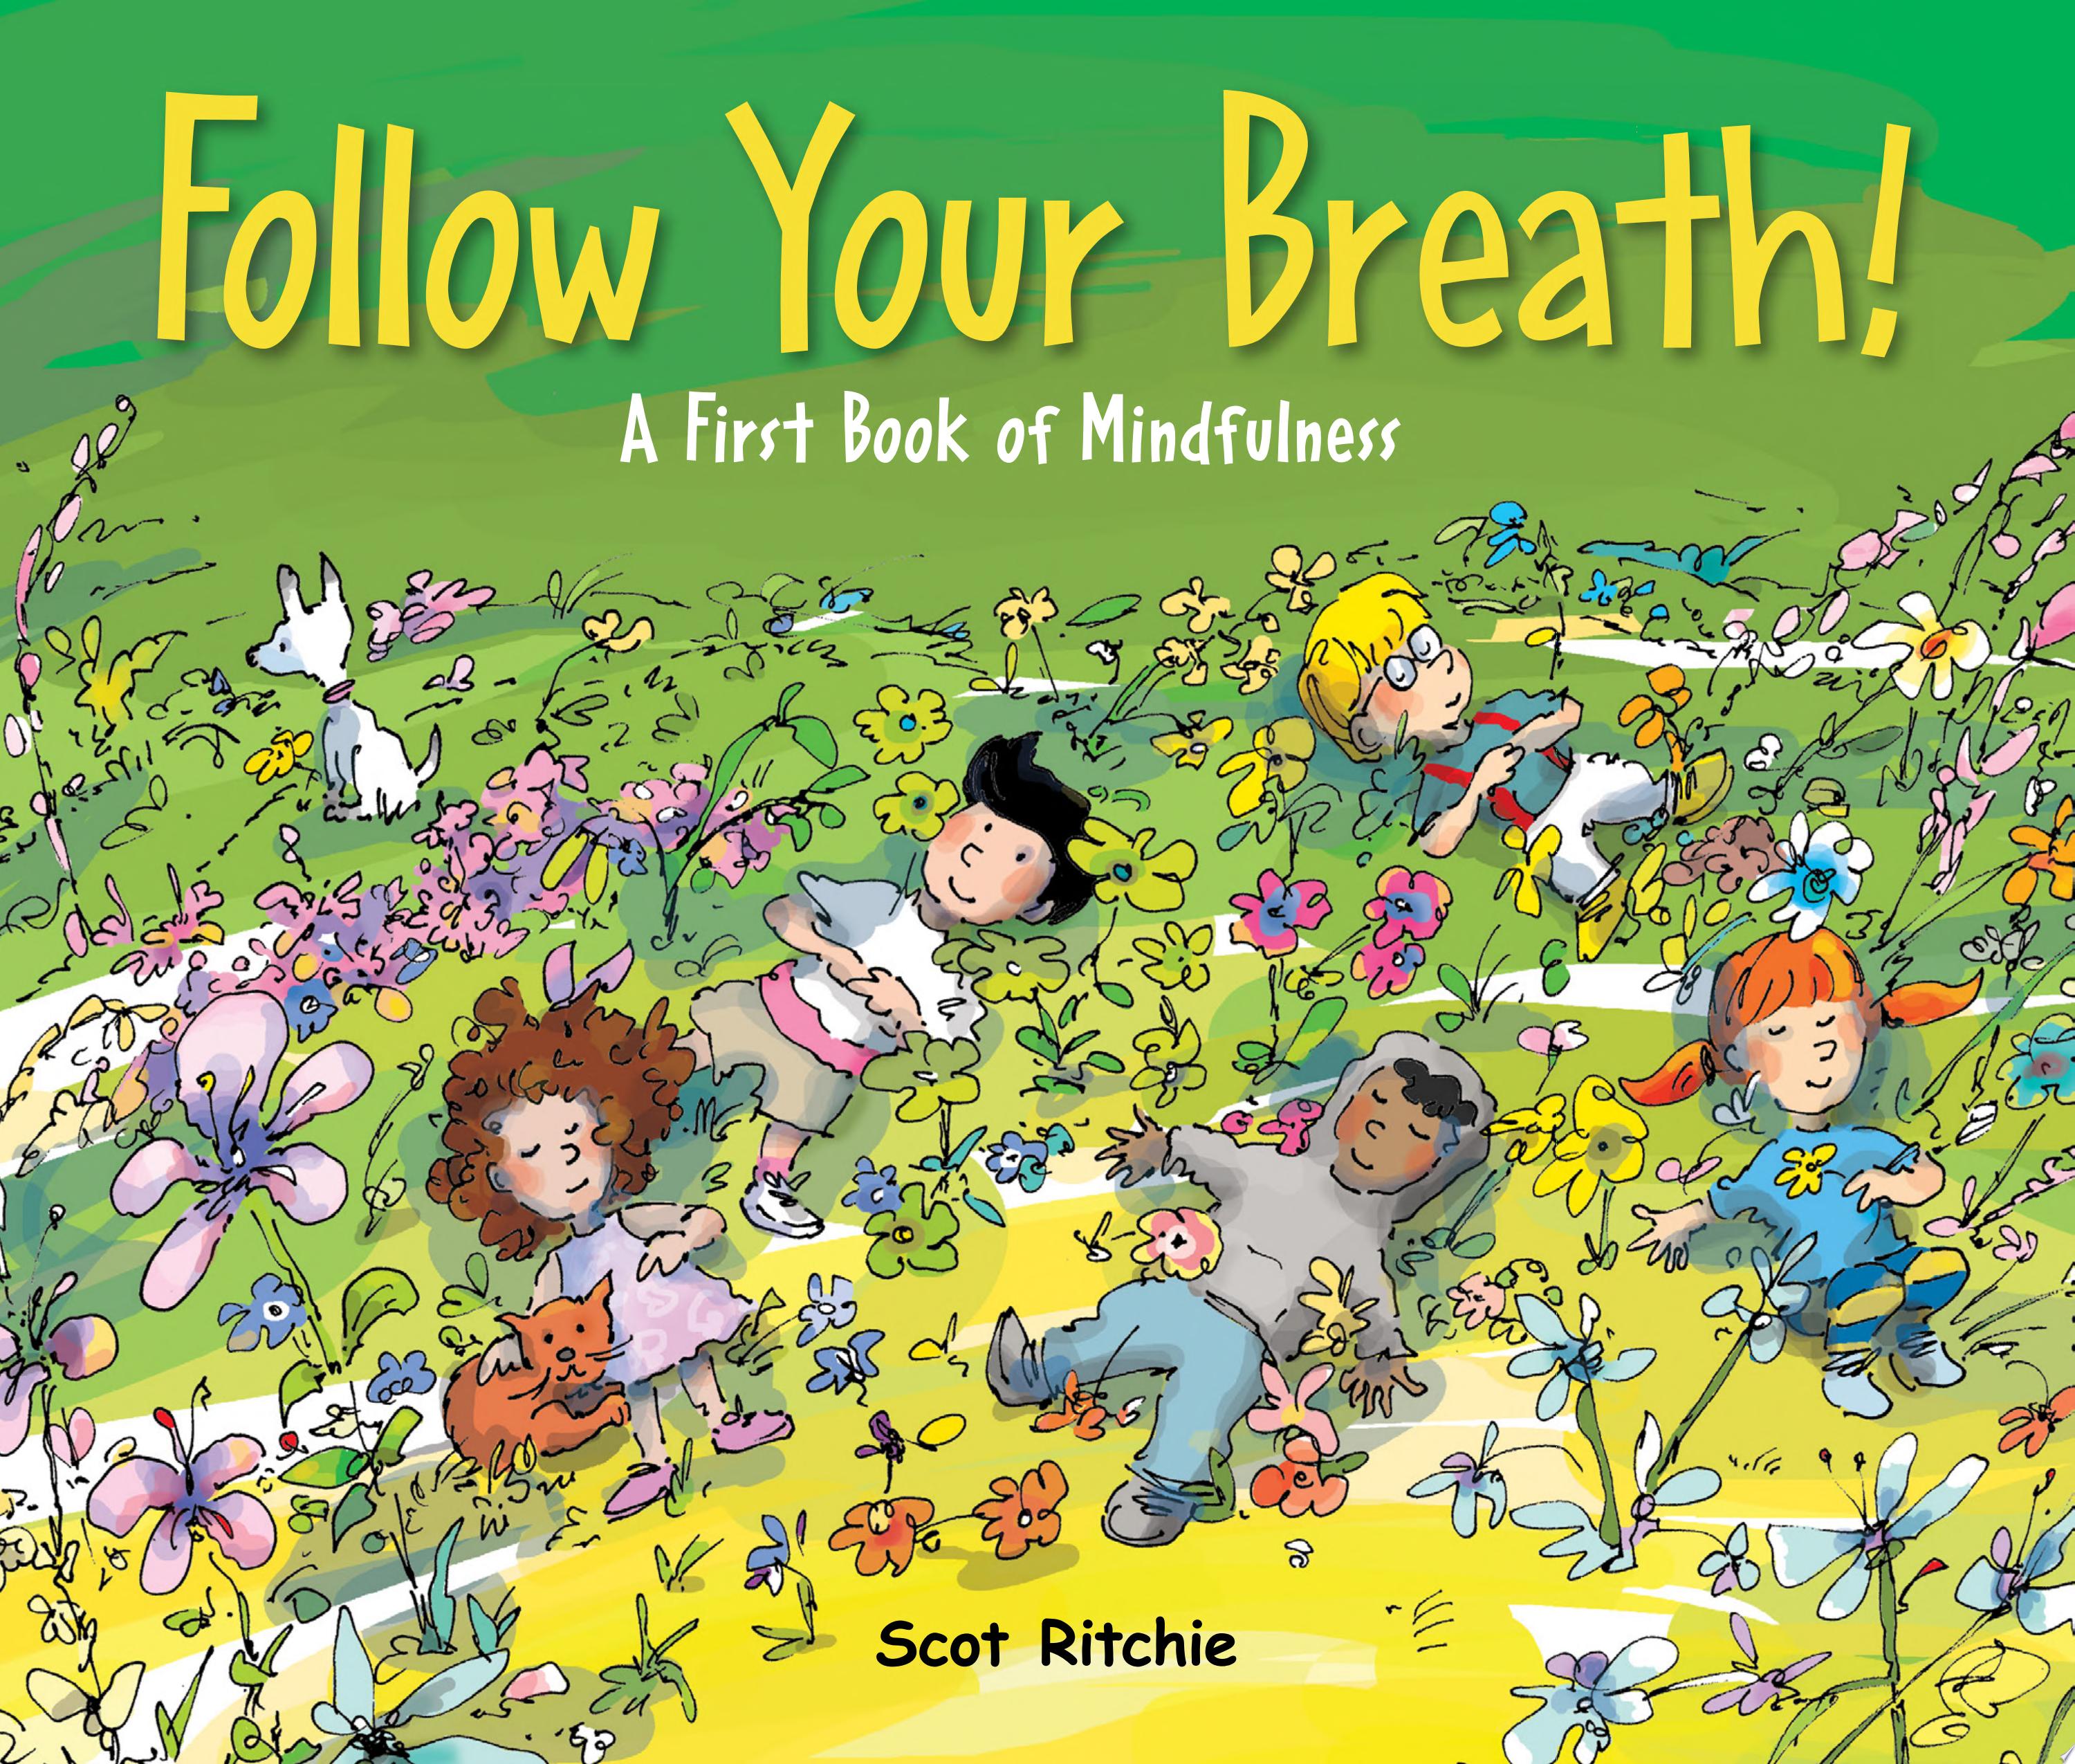 Image for "Follow Your Breath!"